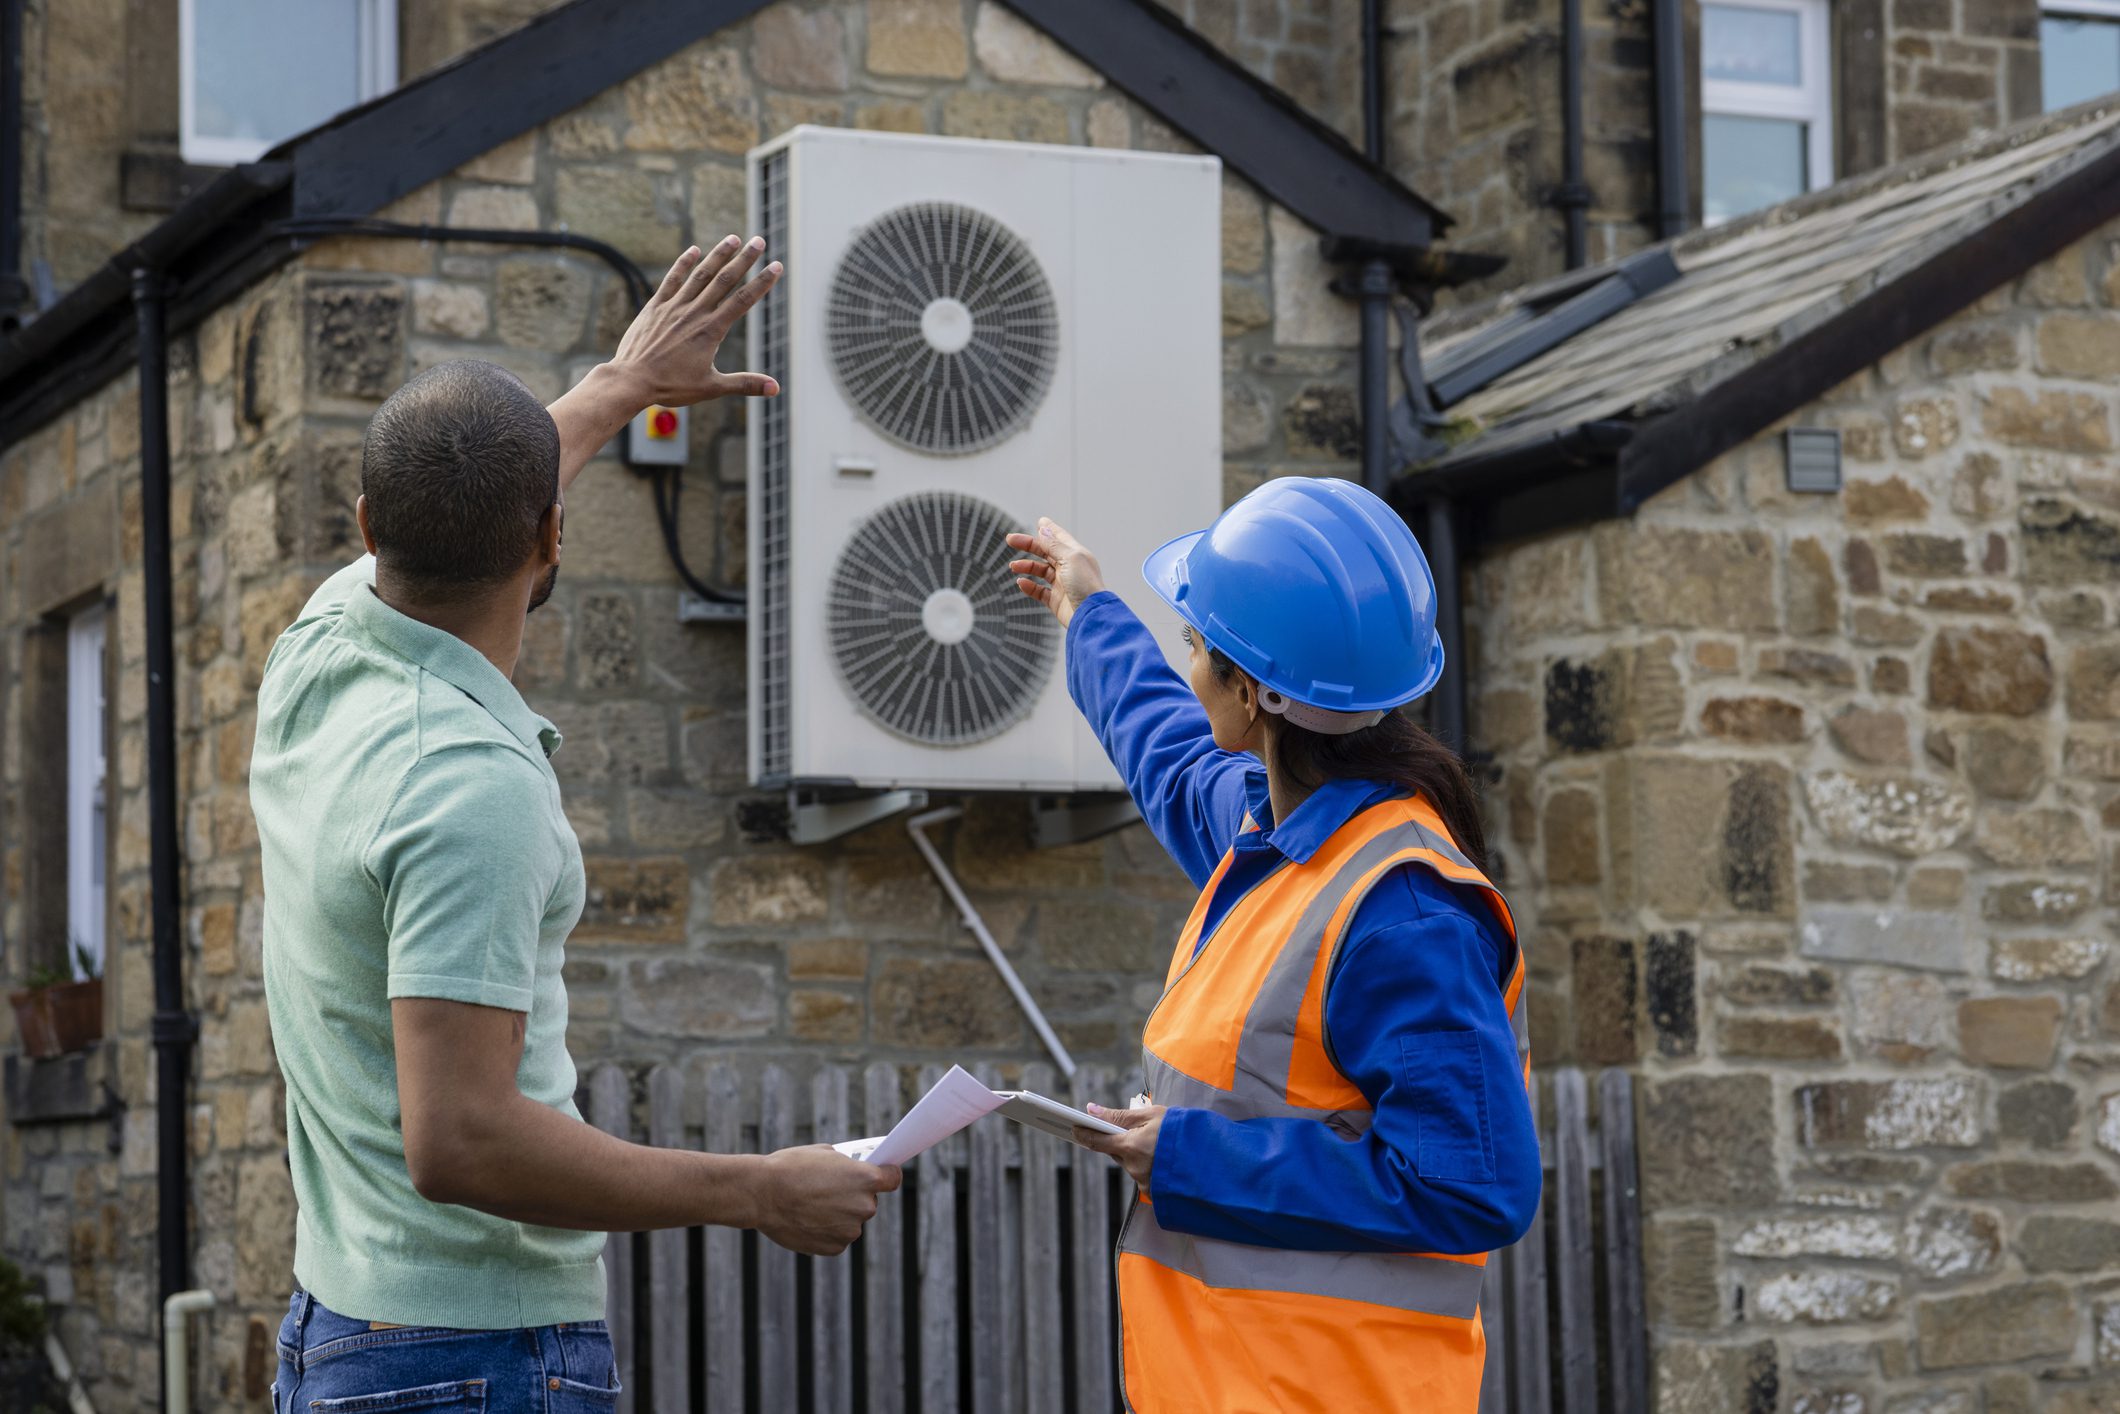 An air source heat pump on the side of a home being installed in the North East of England. The house is aiming to be sustainable. There is a construction worker with a hard hat and reflective jacket holding a digital tablet, they are both pointing to the heat pump.